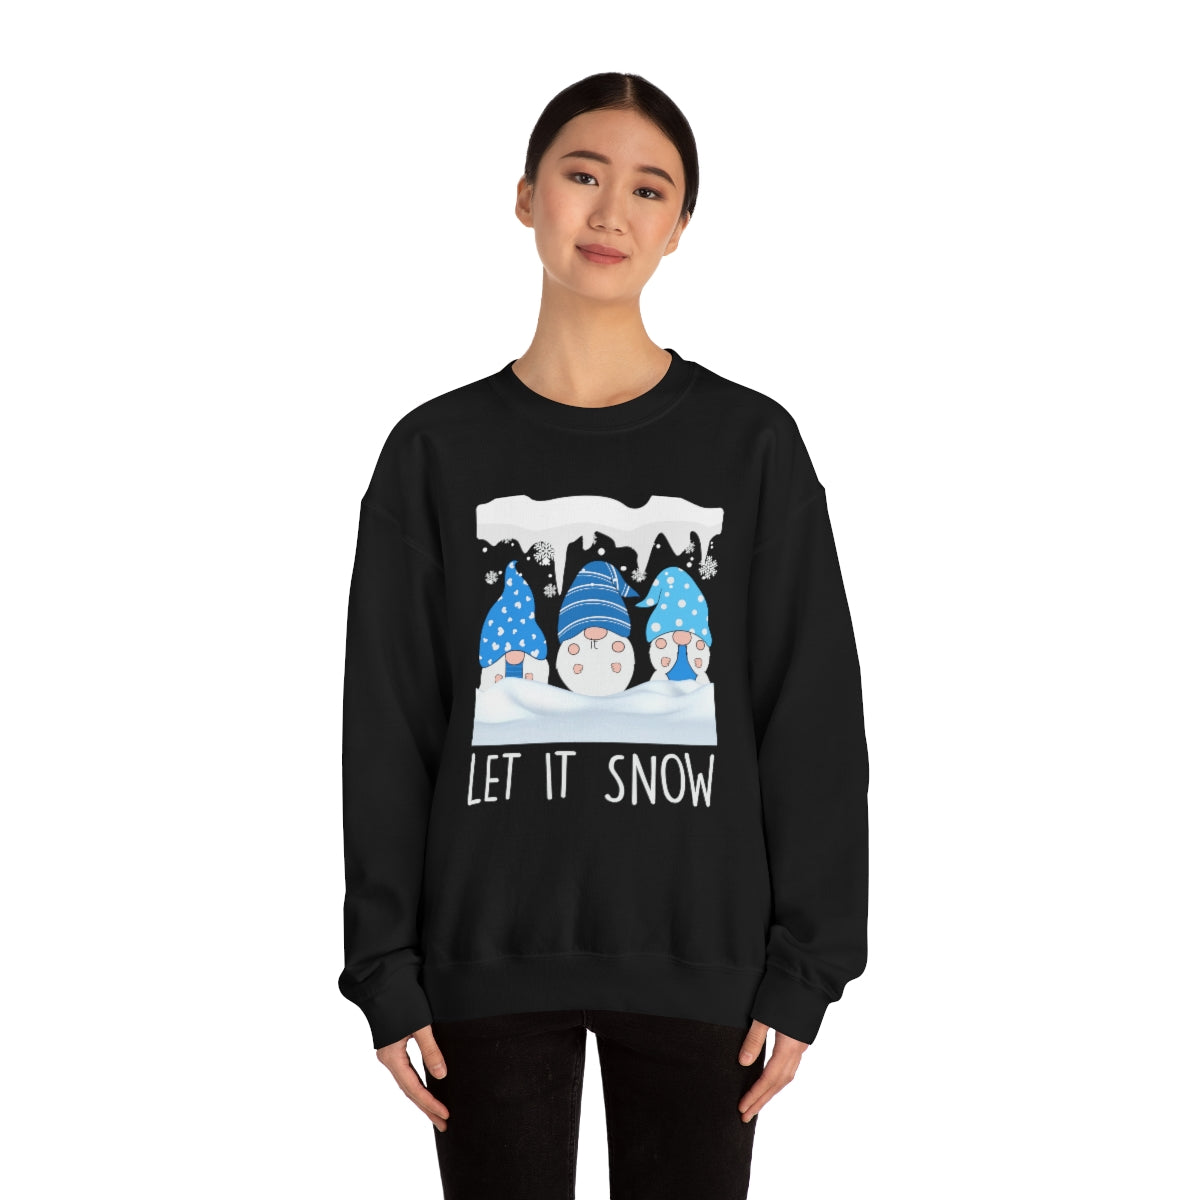 HomesteadMerch Snow Sweatshirt, Her, Gnome Gift, Gift Snow, – Let Christmas It for Holi